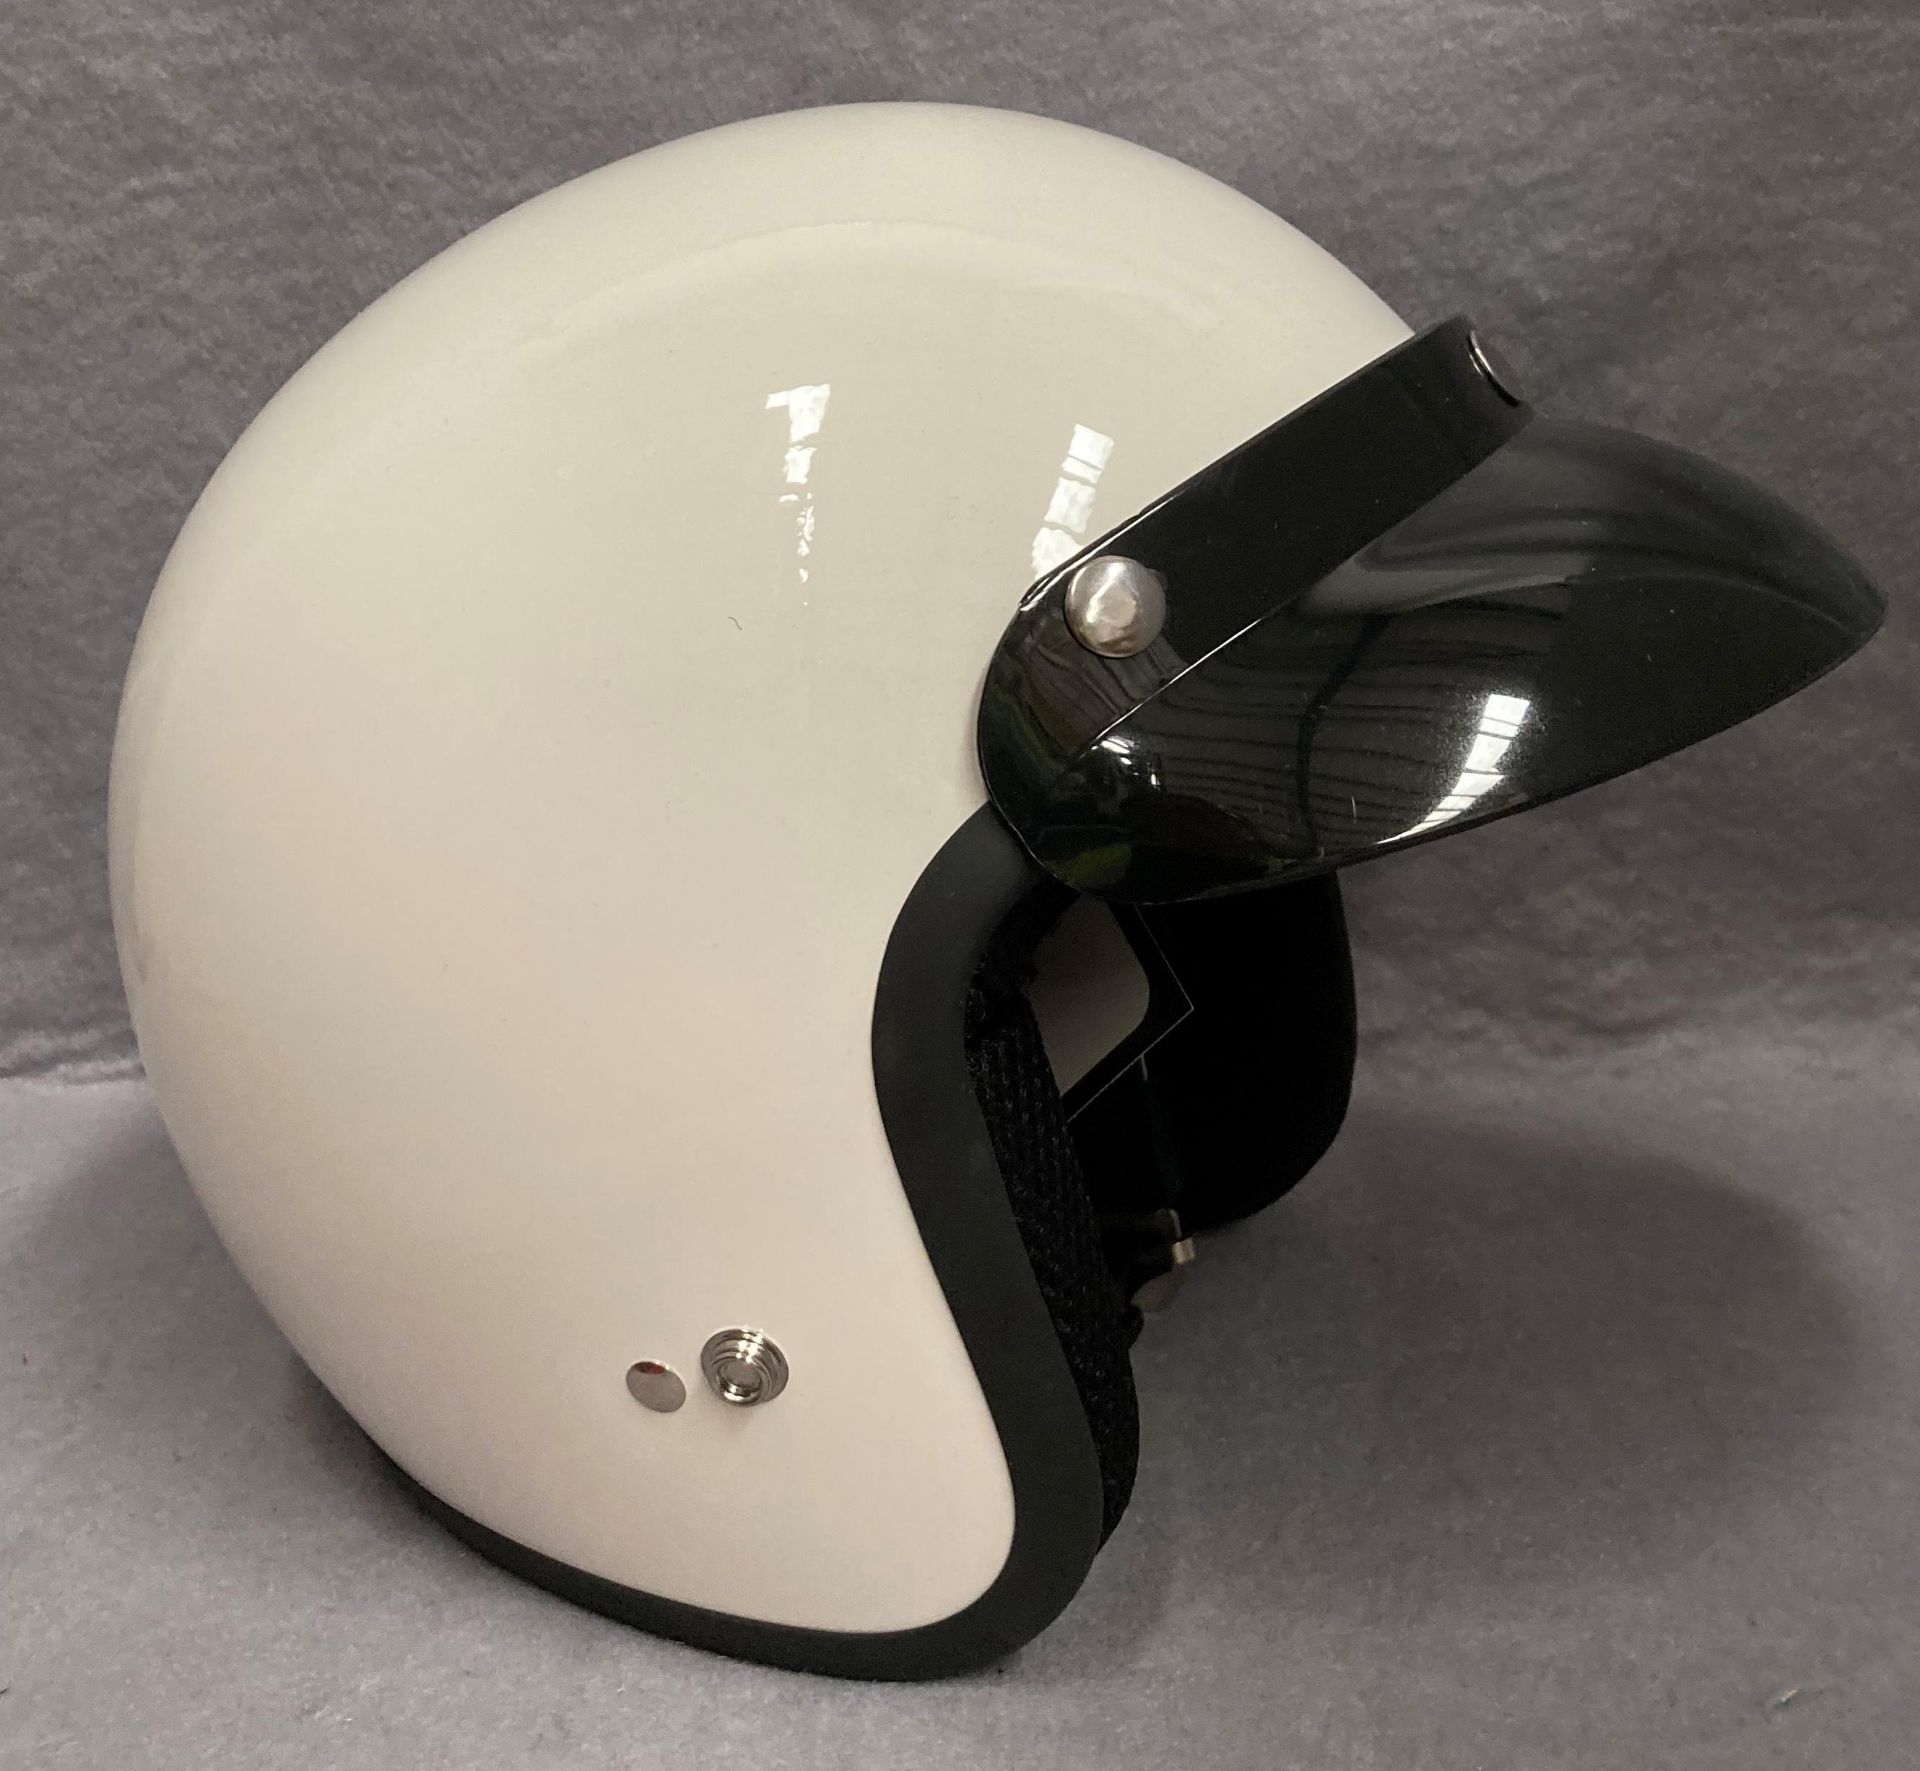 Viper RS04 motorbike helmet in white - size XL (boxed) - Image 3 of 3